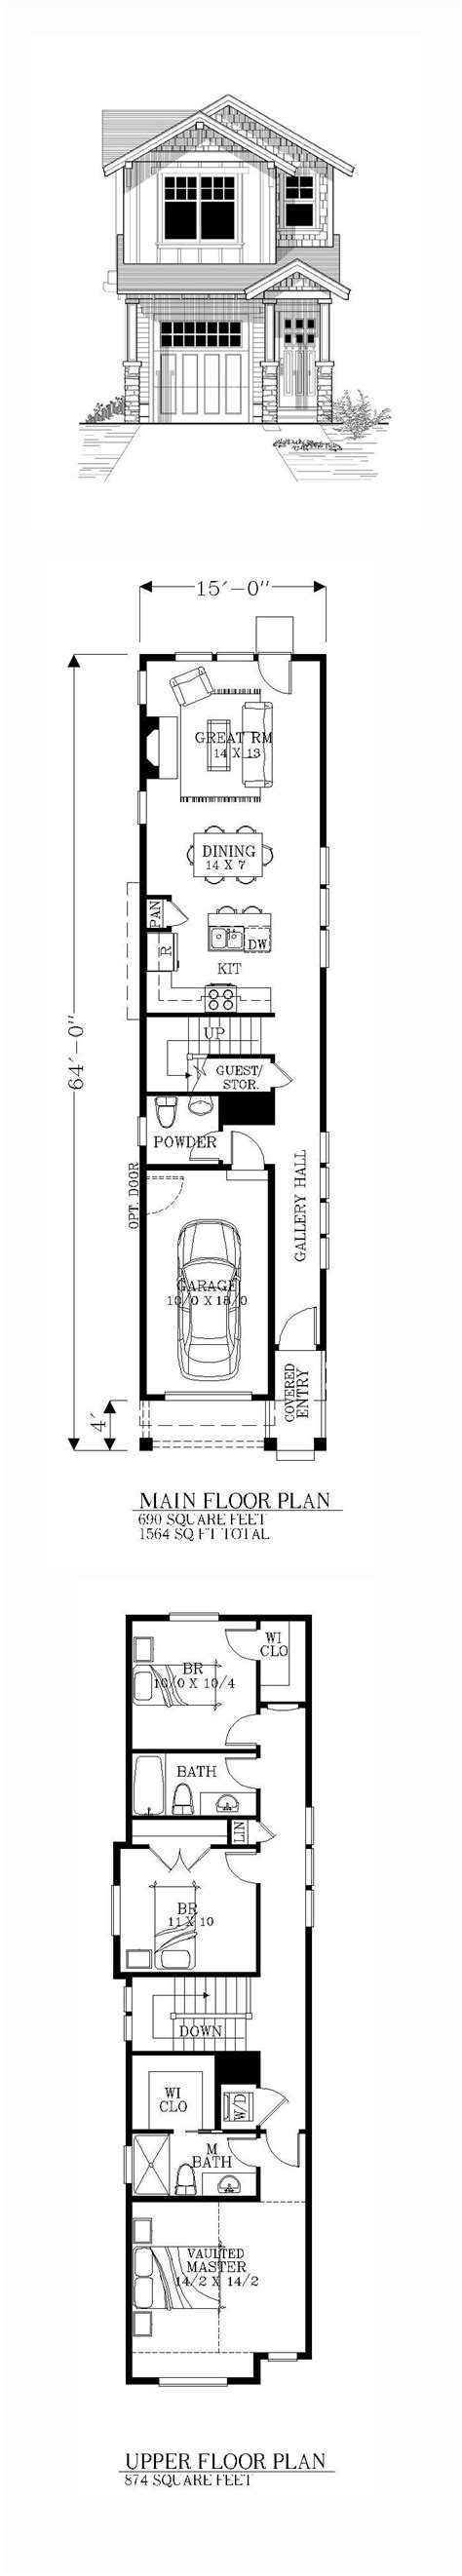 The narrow lot house is not always a small home and can be found in all architectural styles. The Perfect Paint Schemes for House Exterior | Narrow lot house plans, Narrow house plans ...